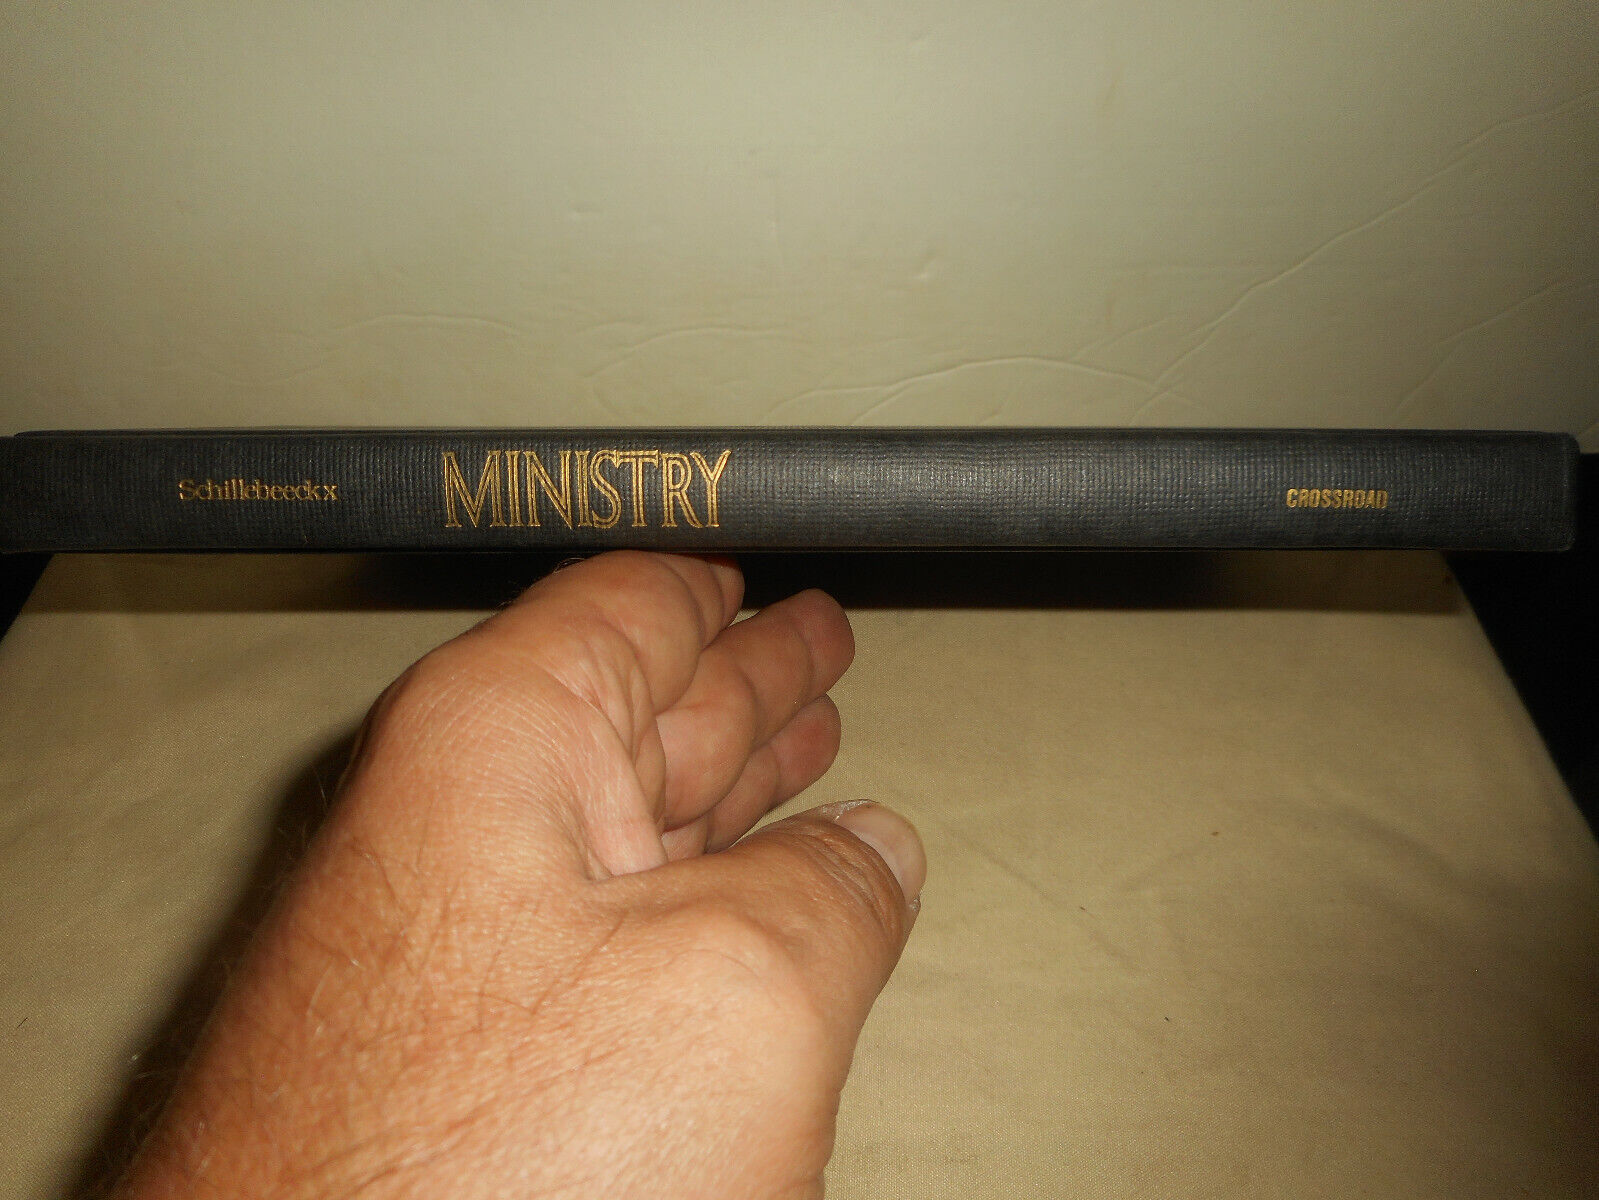 MINISTRY Leadership In The Community Of Jesus Christ E Shillebeeckx 1981 HC BOOK